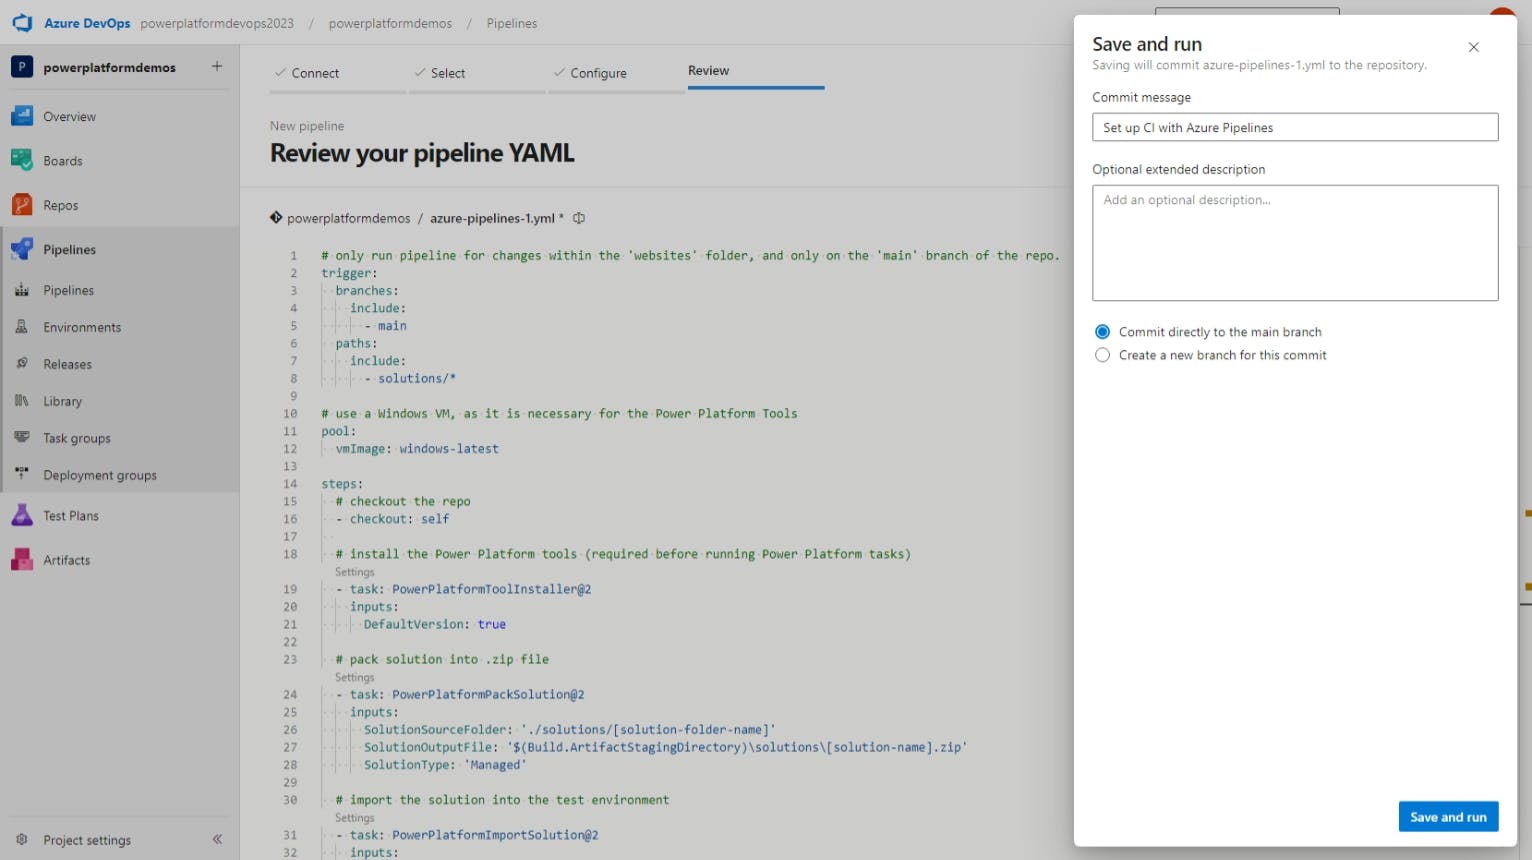 Screenshot of 'Save and run' step of creating a new Azure DevOps pipeline